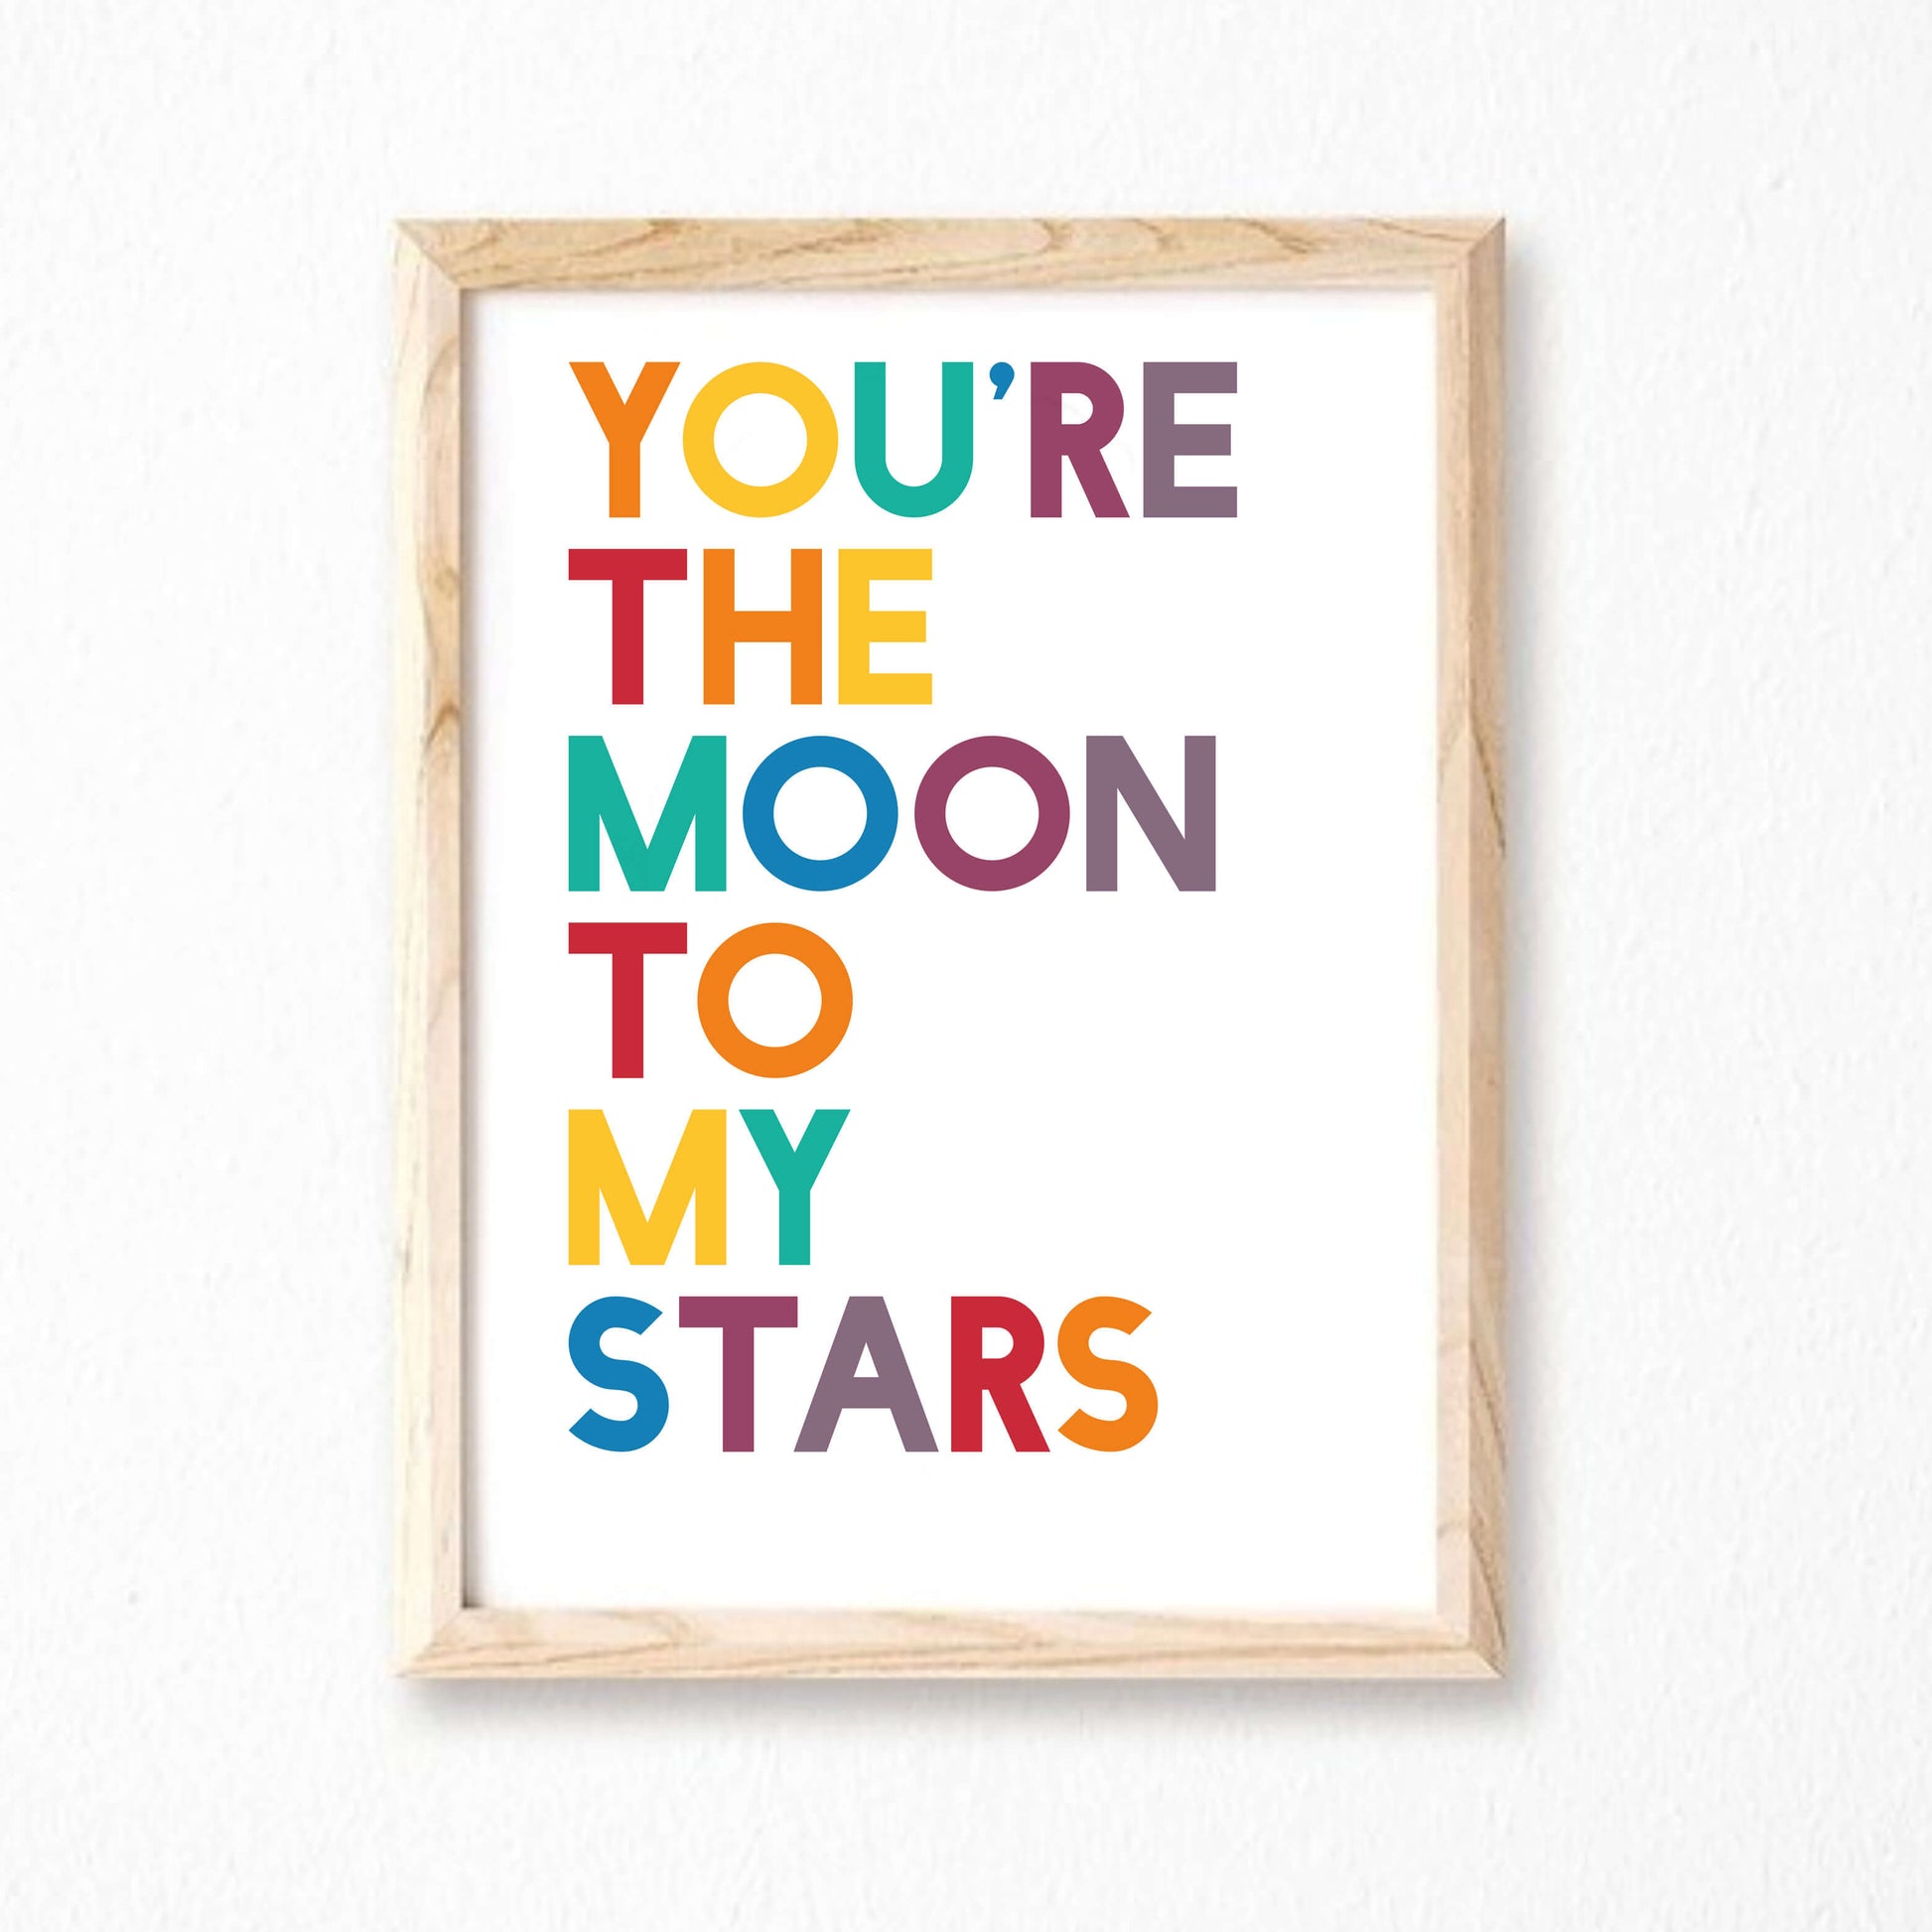 You're The Moon To My Stars Poster by SixElevenCreations. Product Code SEP0209